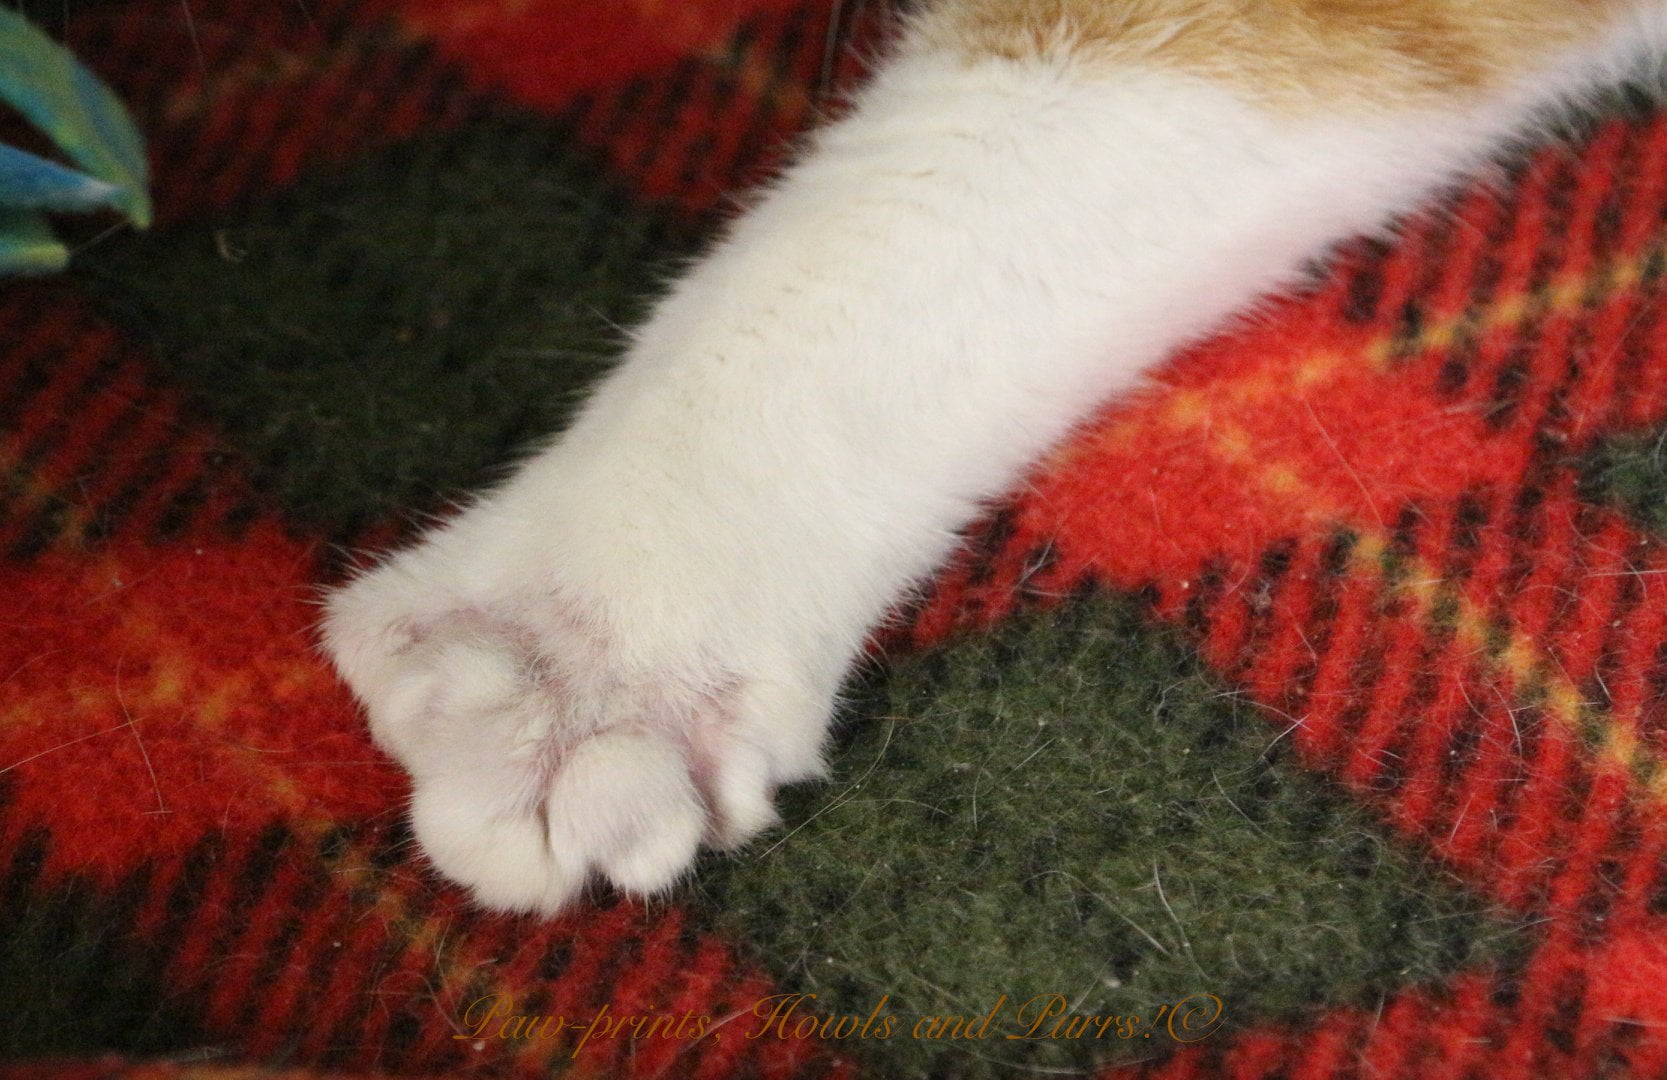 Veterinarian Butchered the Toes of a Polydactyl Cat